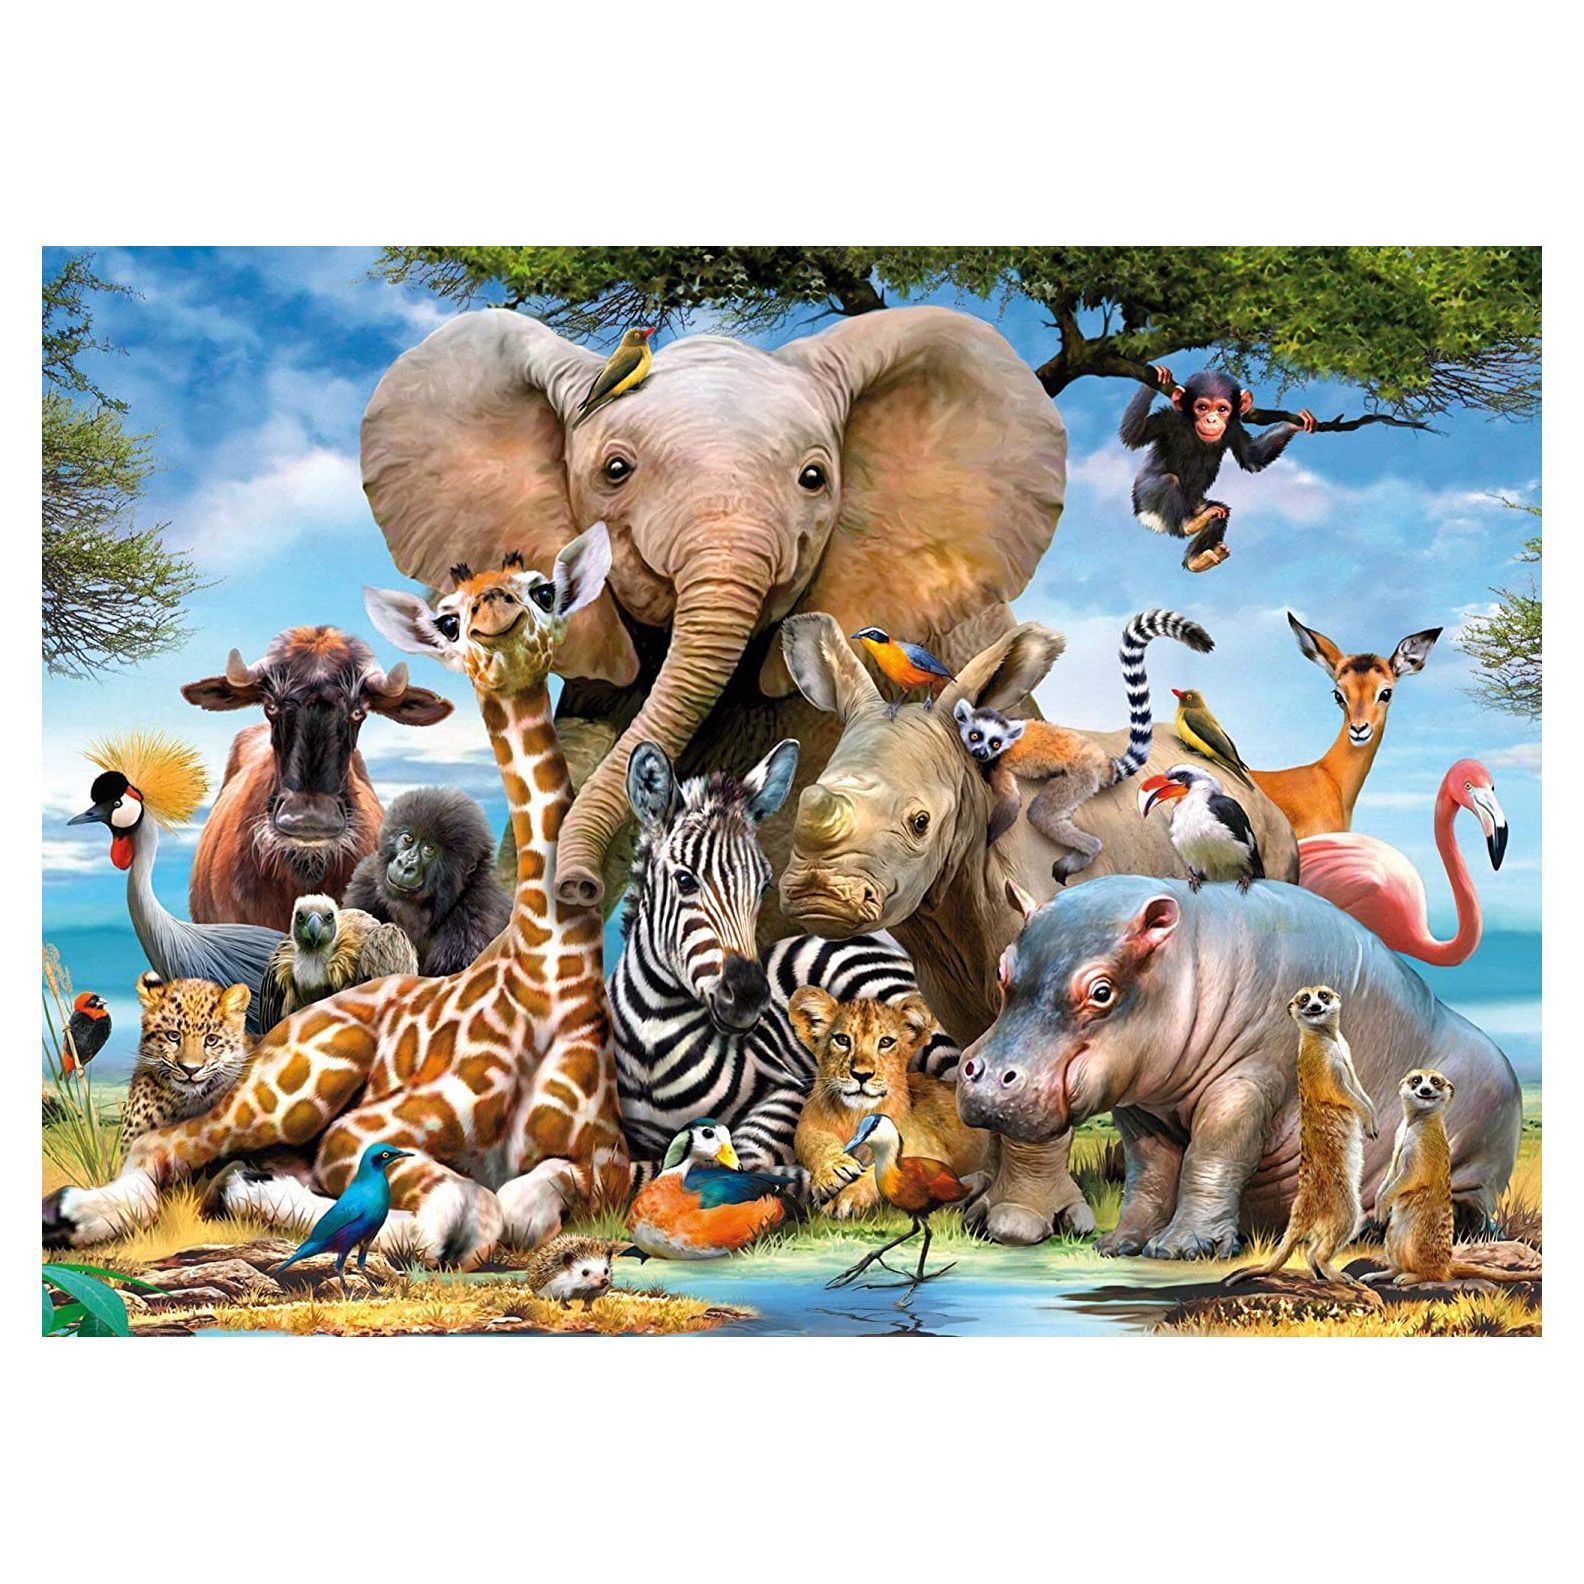 500 1000 300 Pieces Jigsaw Puzzles New For Adults Kids Learning Education